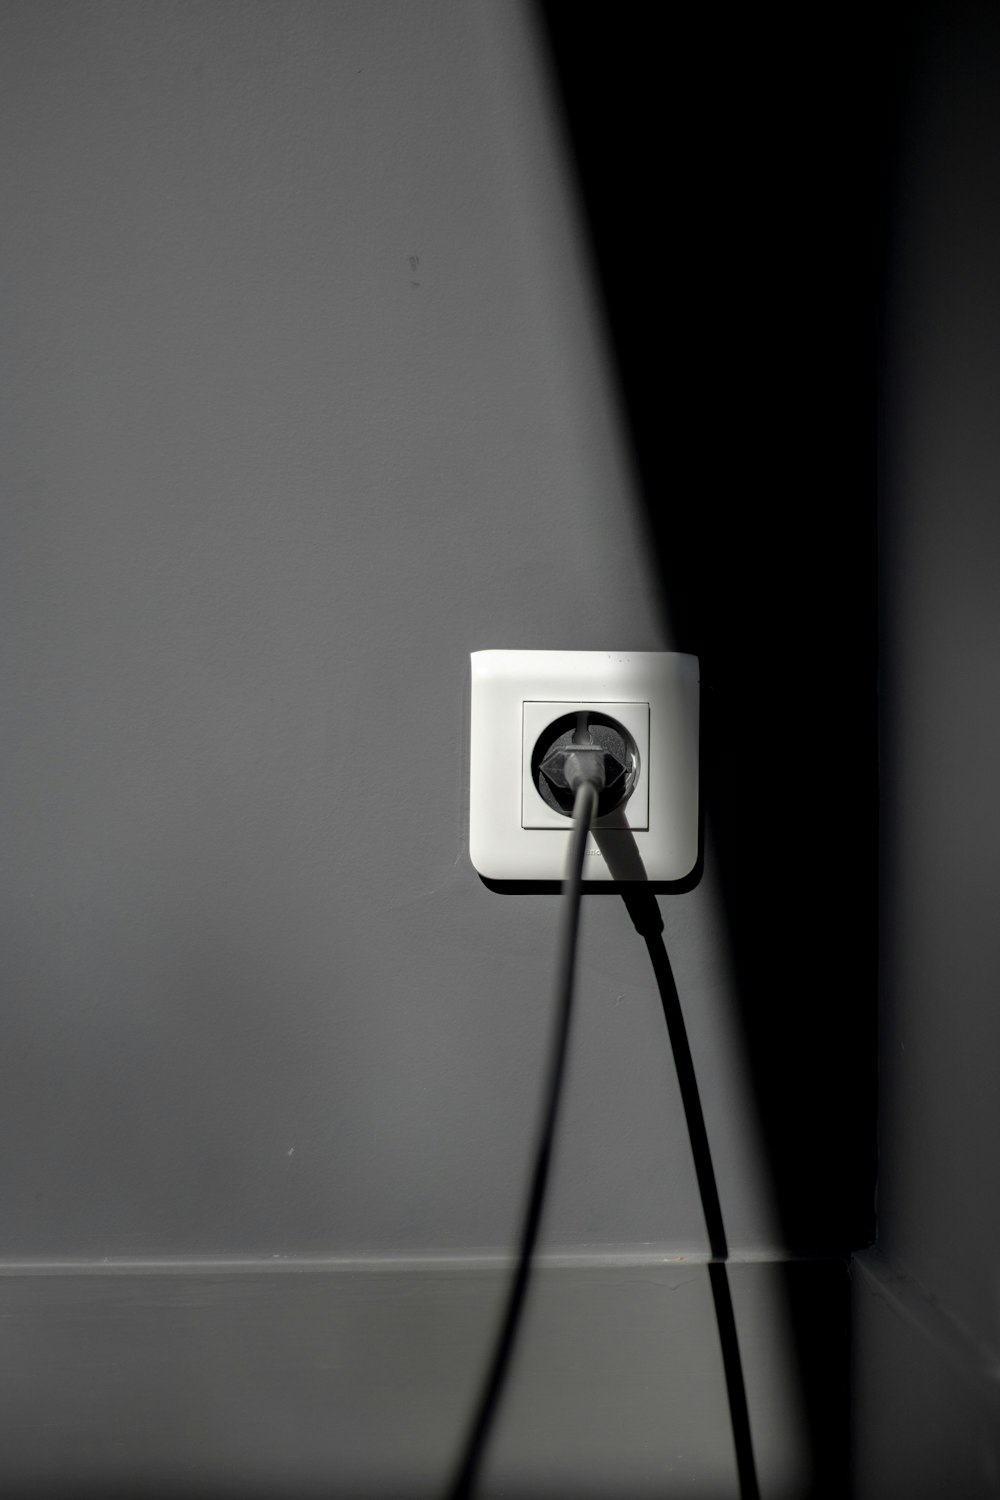 Cigarette Lighter Plug to Wall Outlet